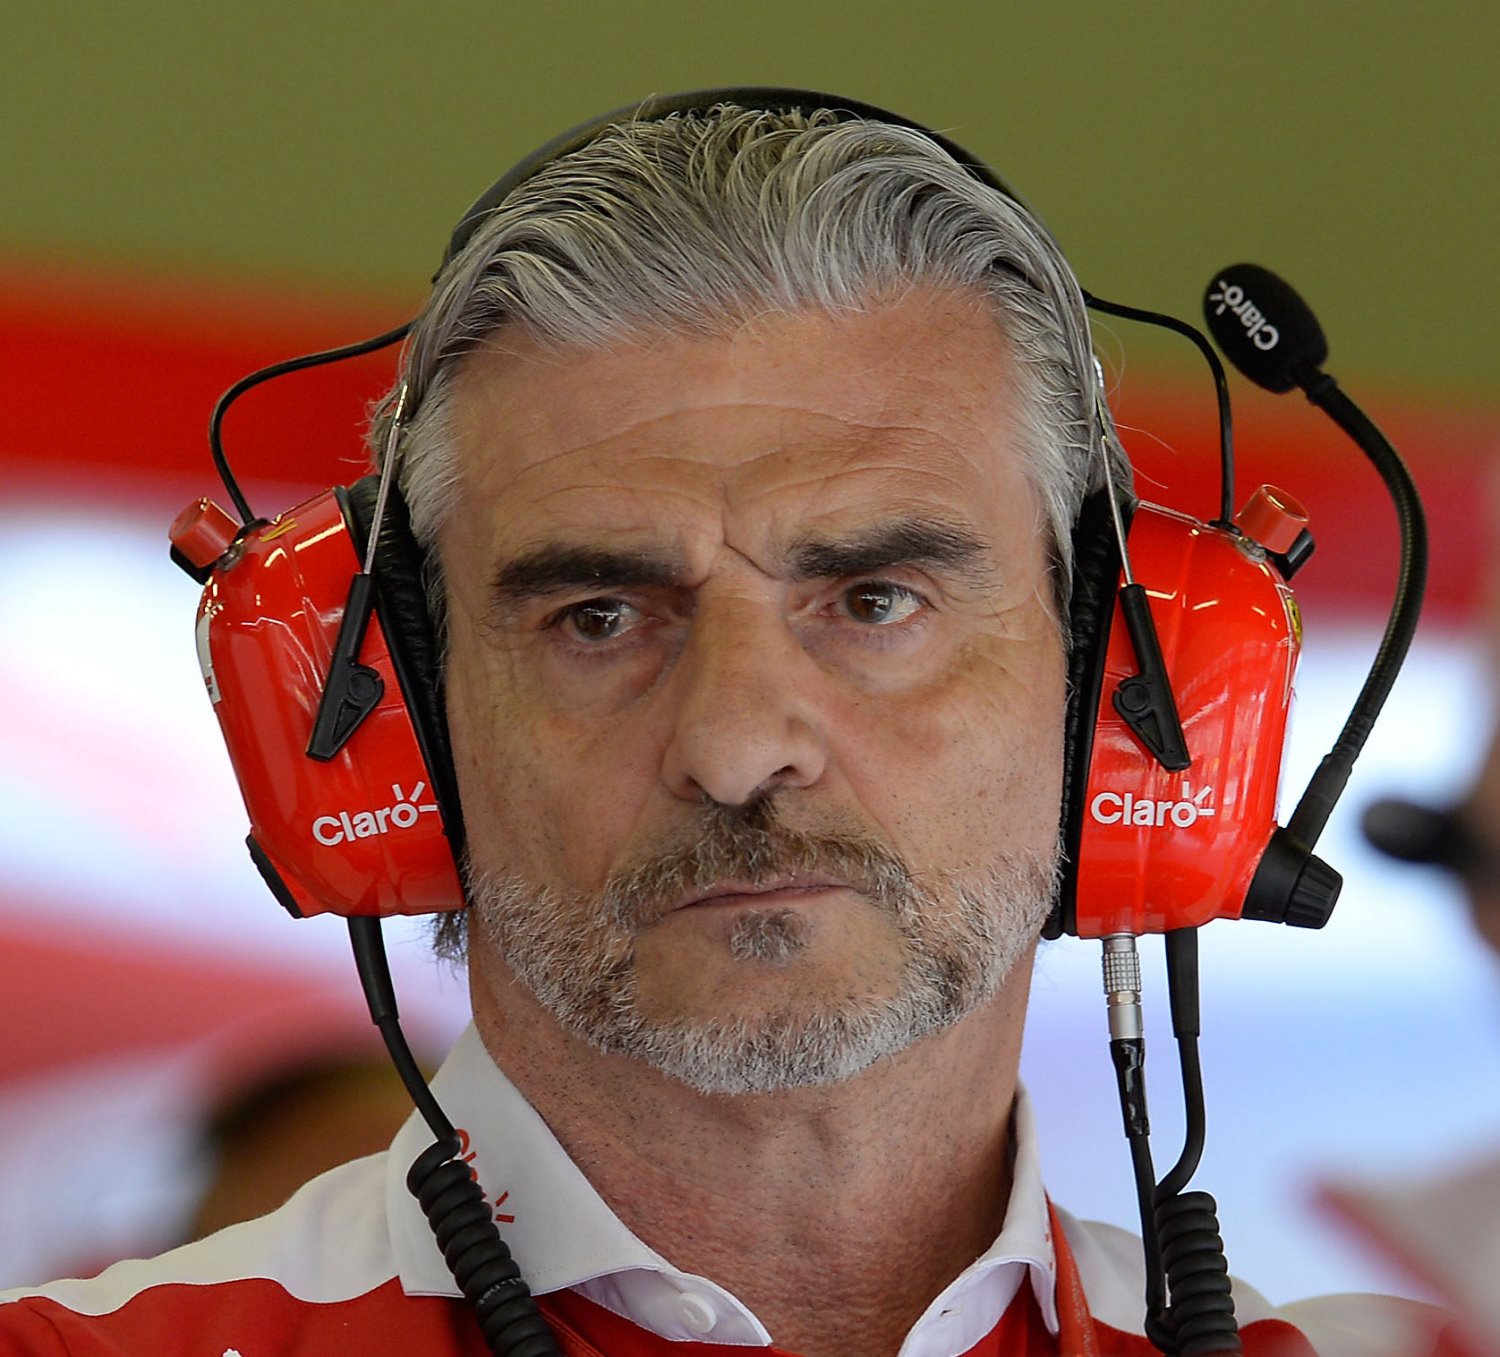 Maurizio Arrivabene realizing his Jimm Allison designed car is not going to catch the Aldo Costa designed Mercedes